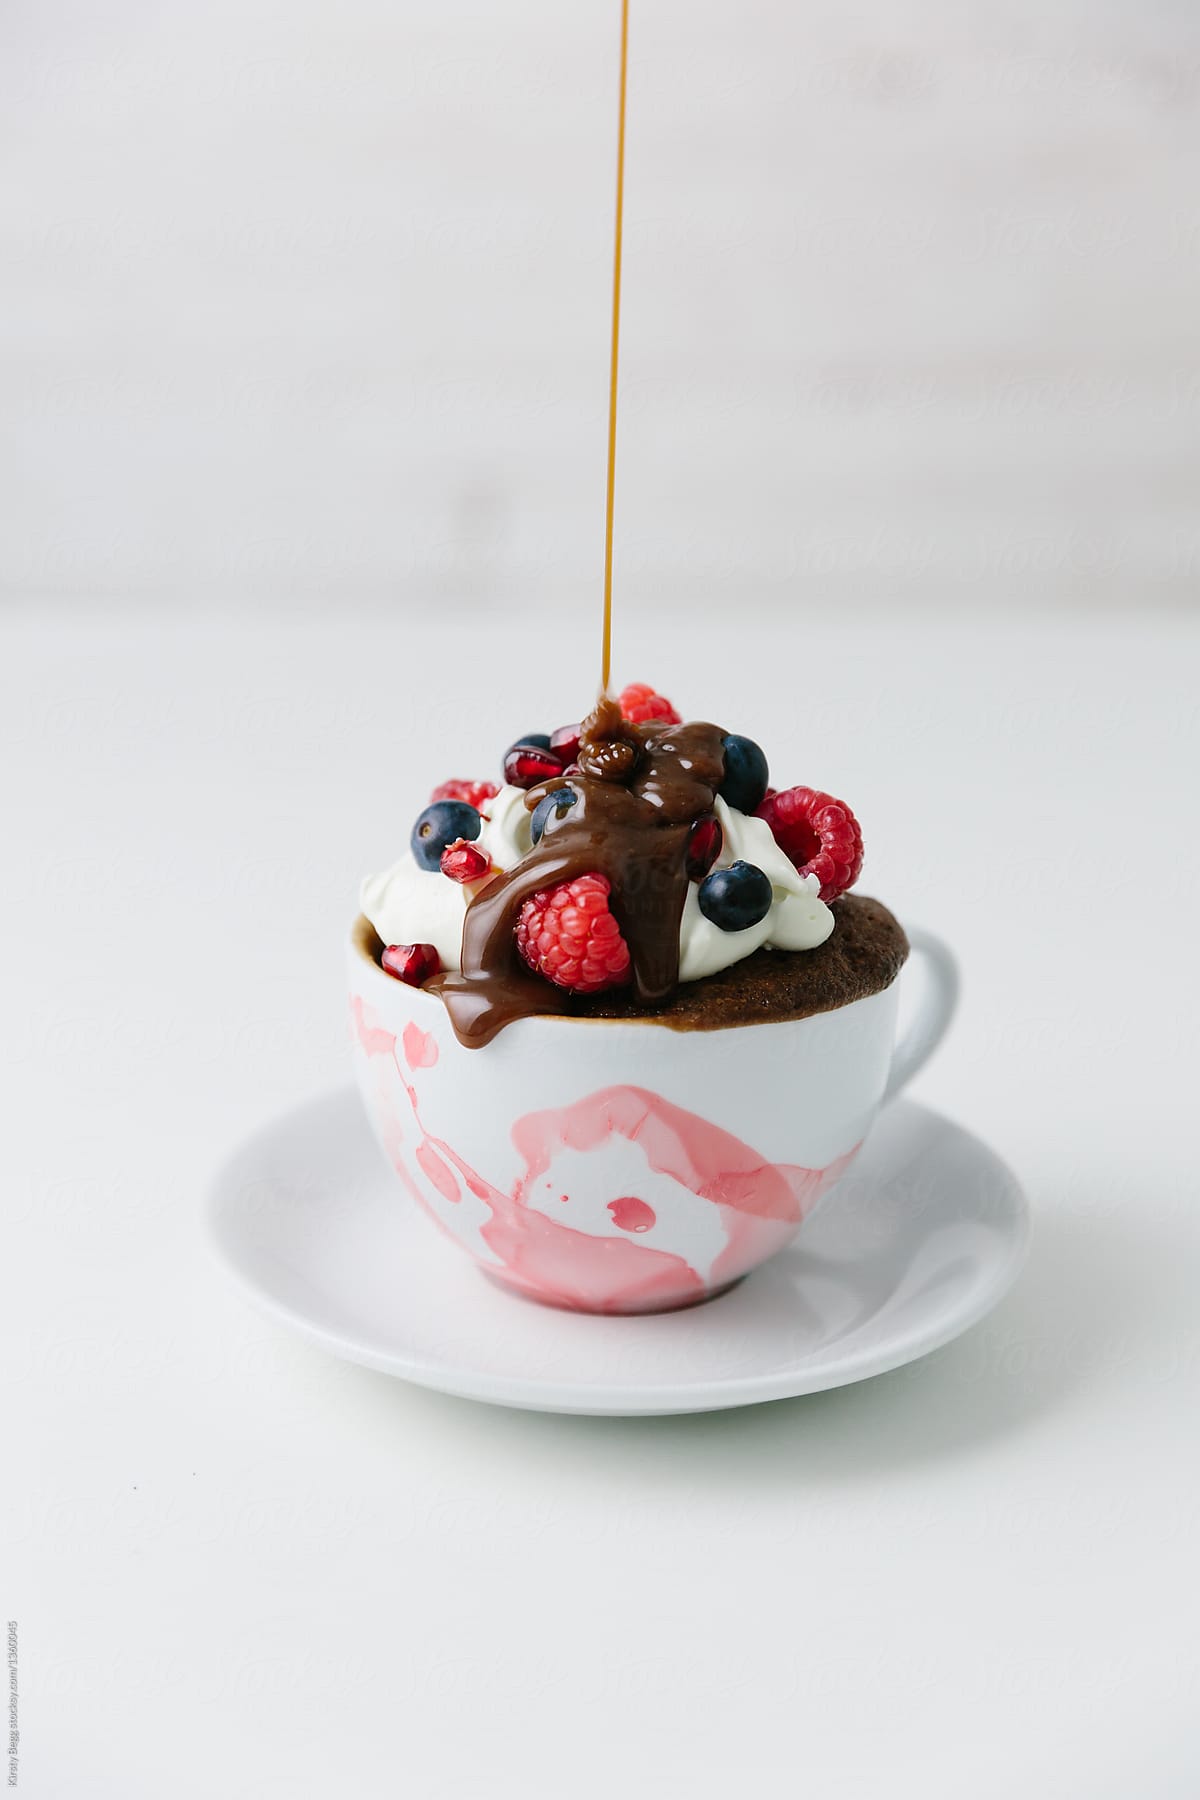 Chocolate drizzled over mug cake dessert with cream and berries